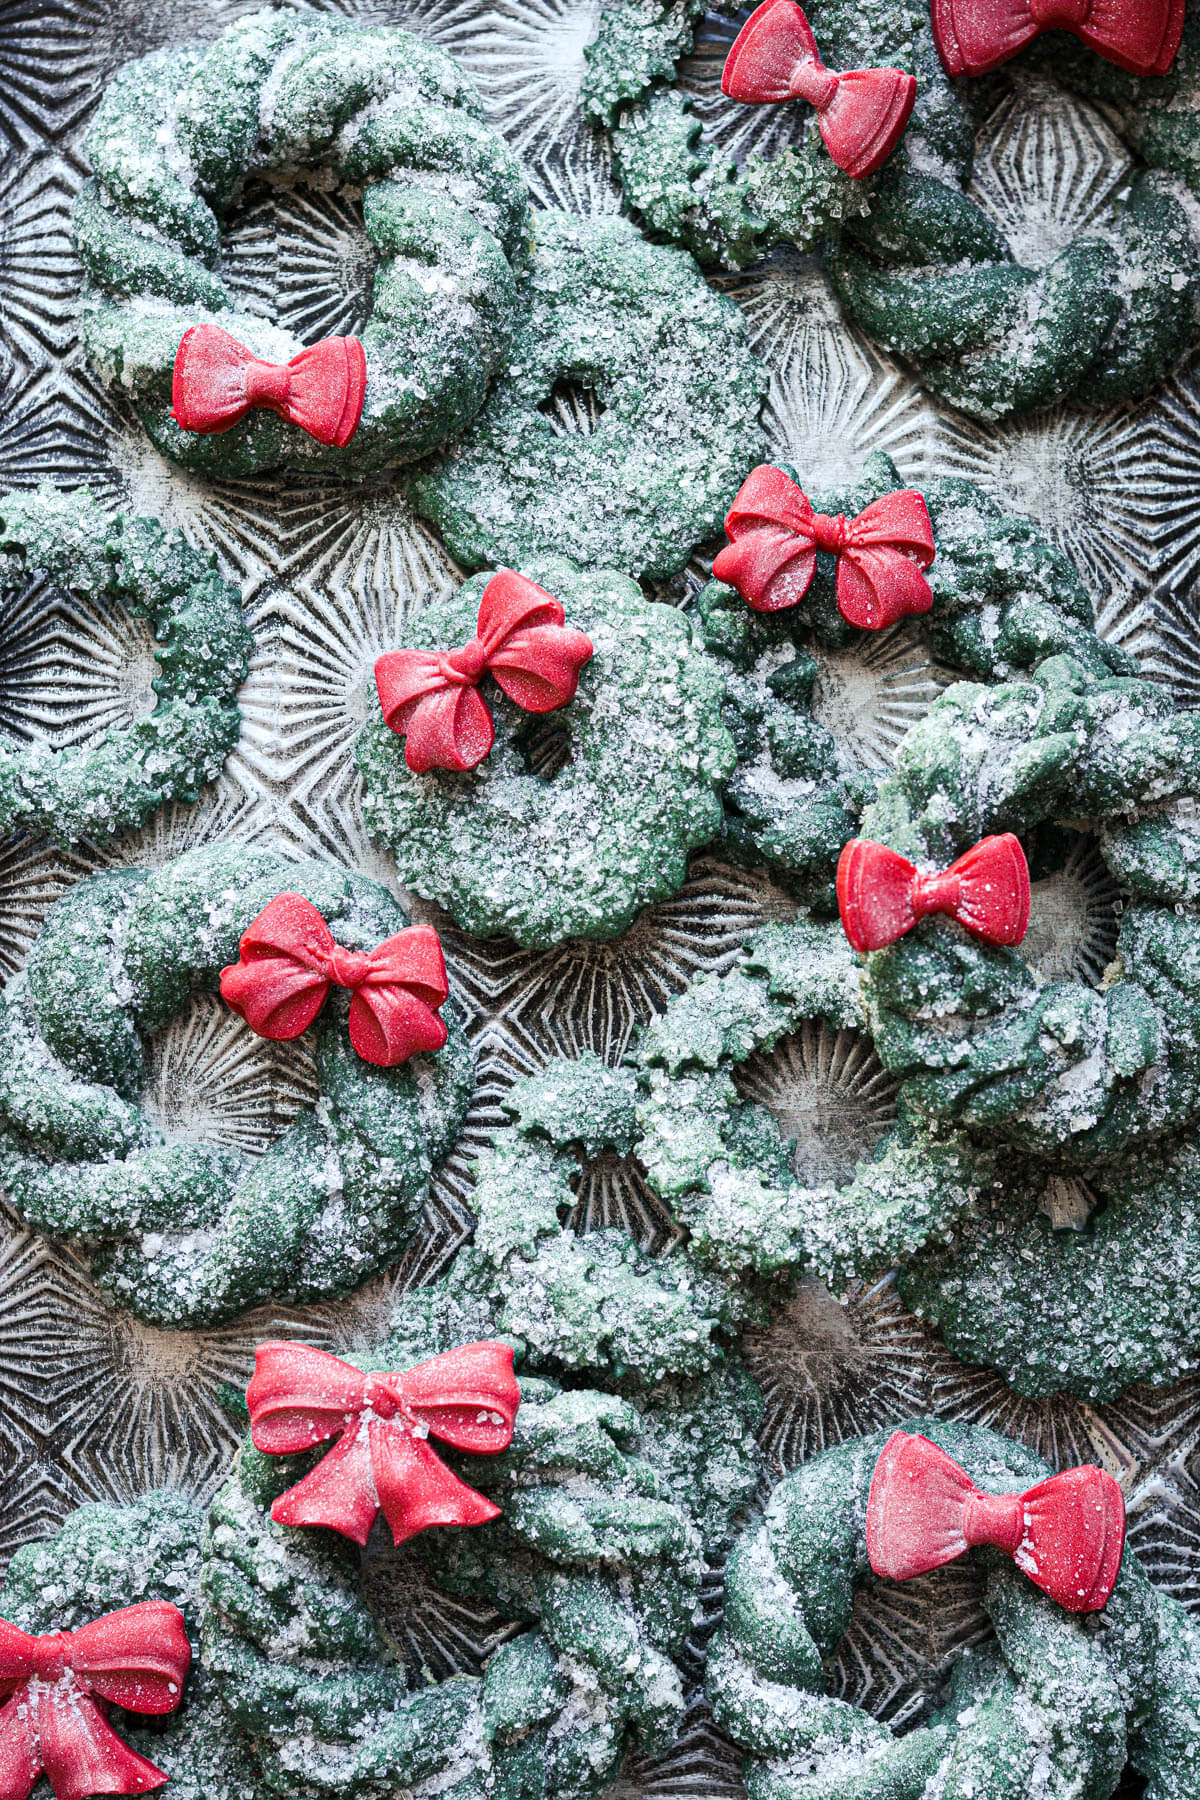 Christmas wreath sugar cookies with red chocolate bows.